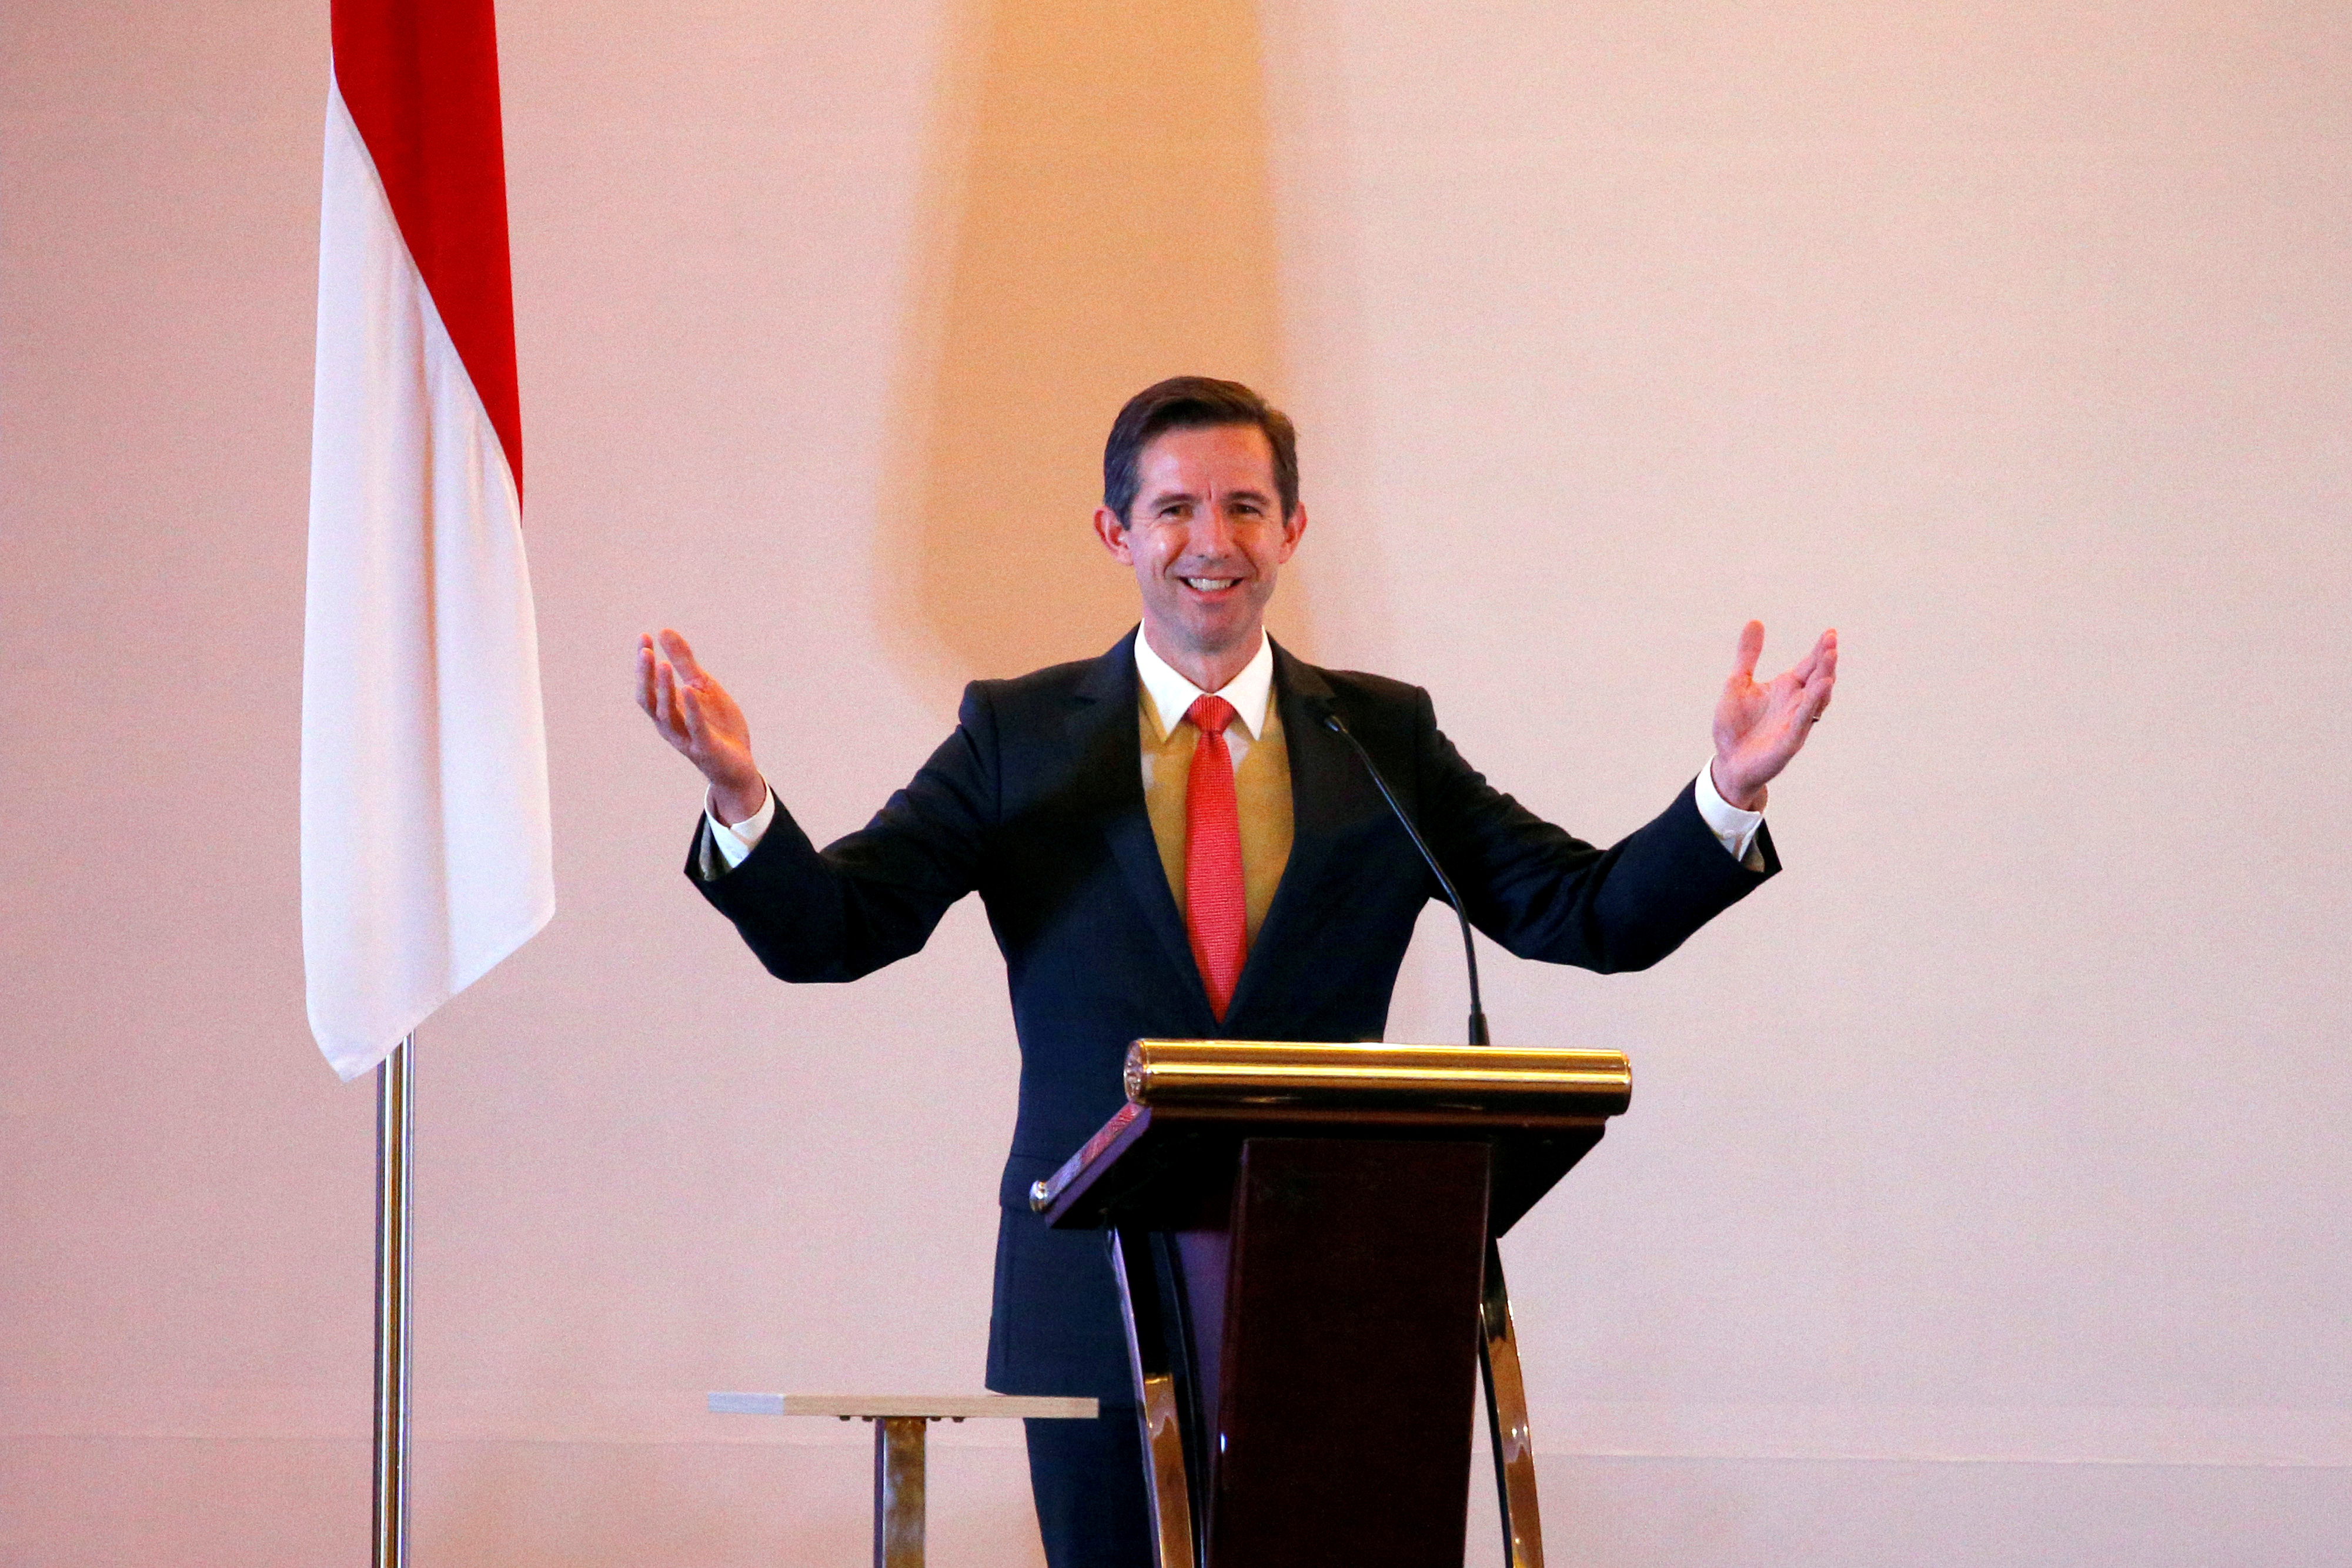 Australia's Minister of Trade, Tourism and Investment Simon Birmingham gestures as he speaks during a signing ceremony with Indonesia's Trade Minister in Jakarta